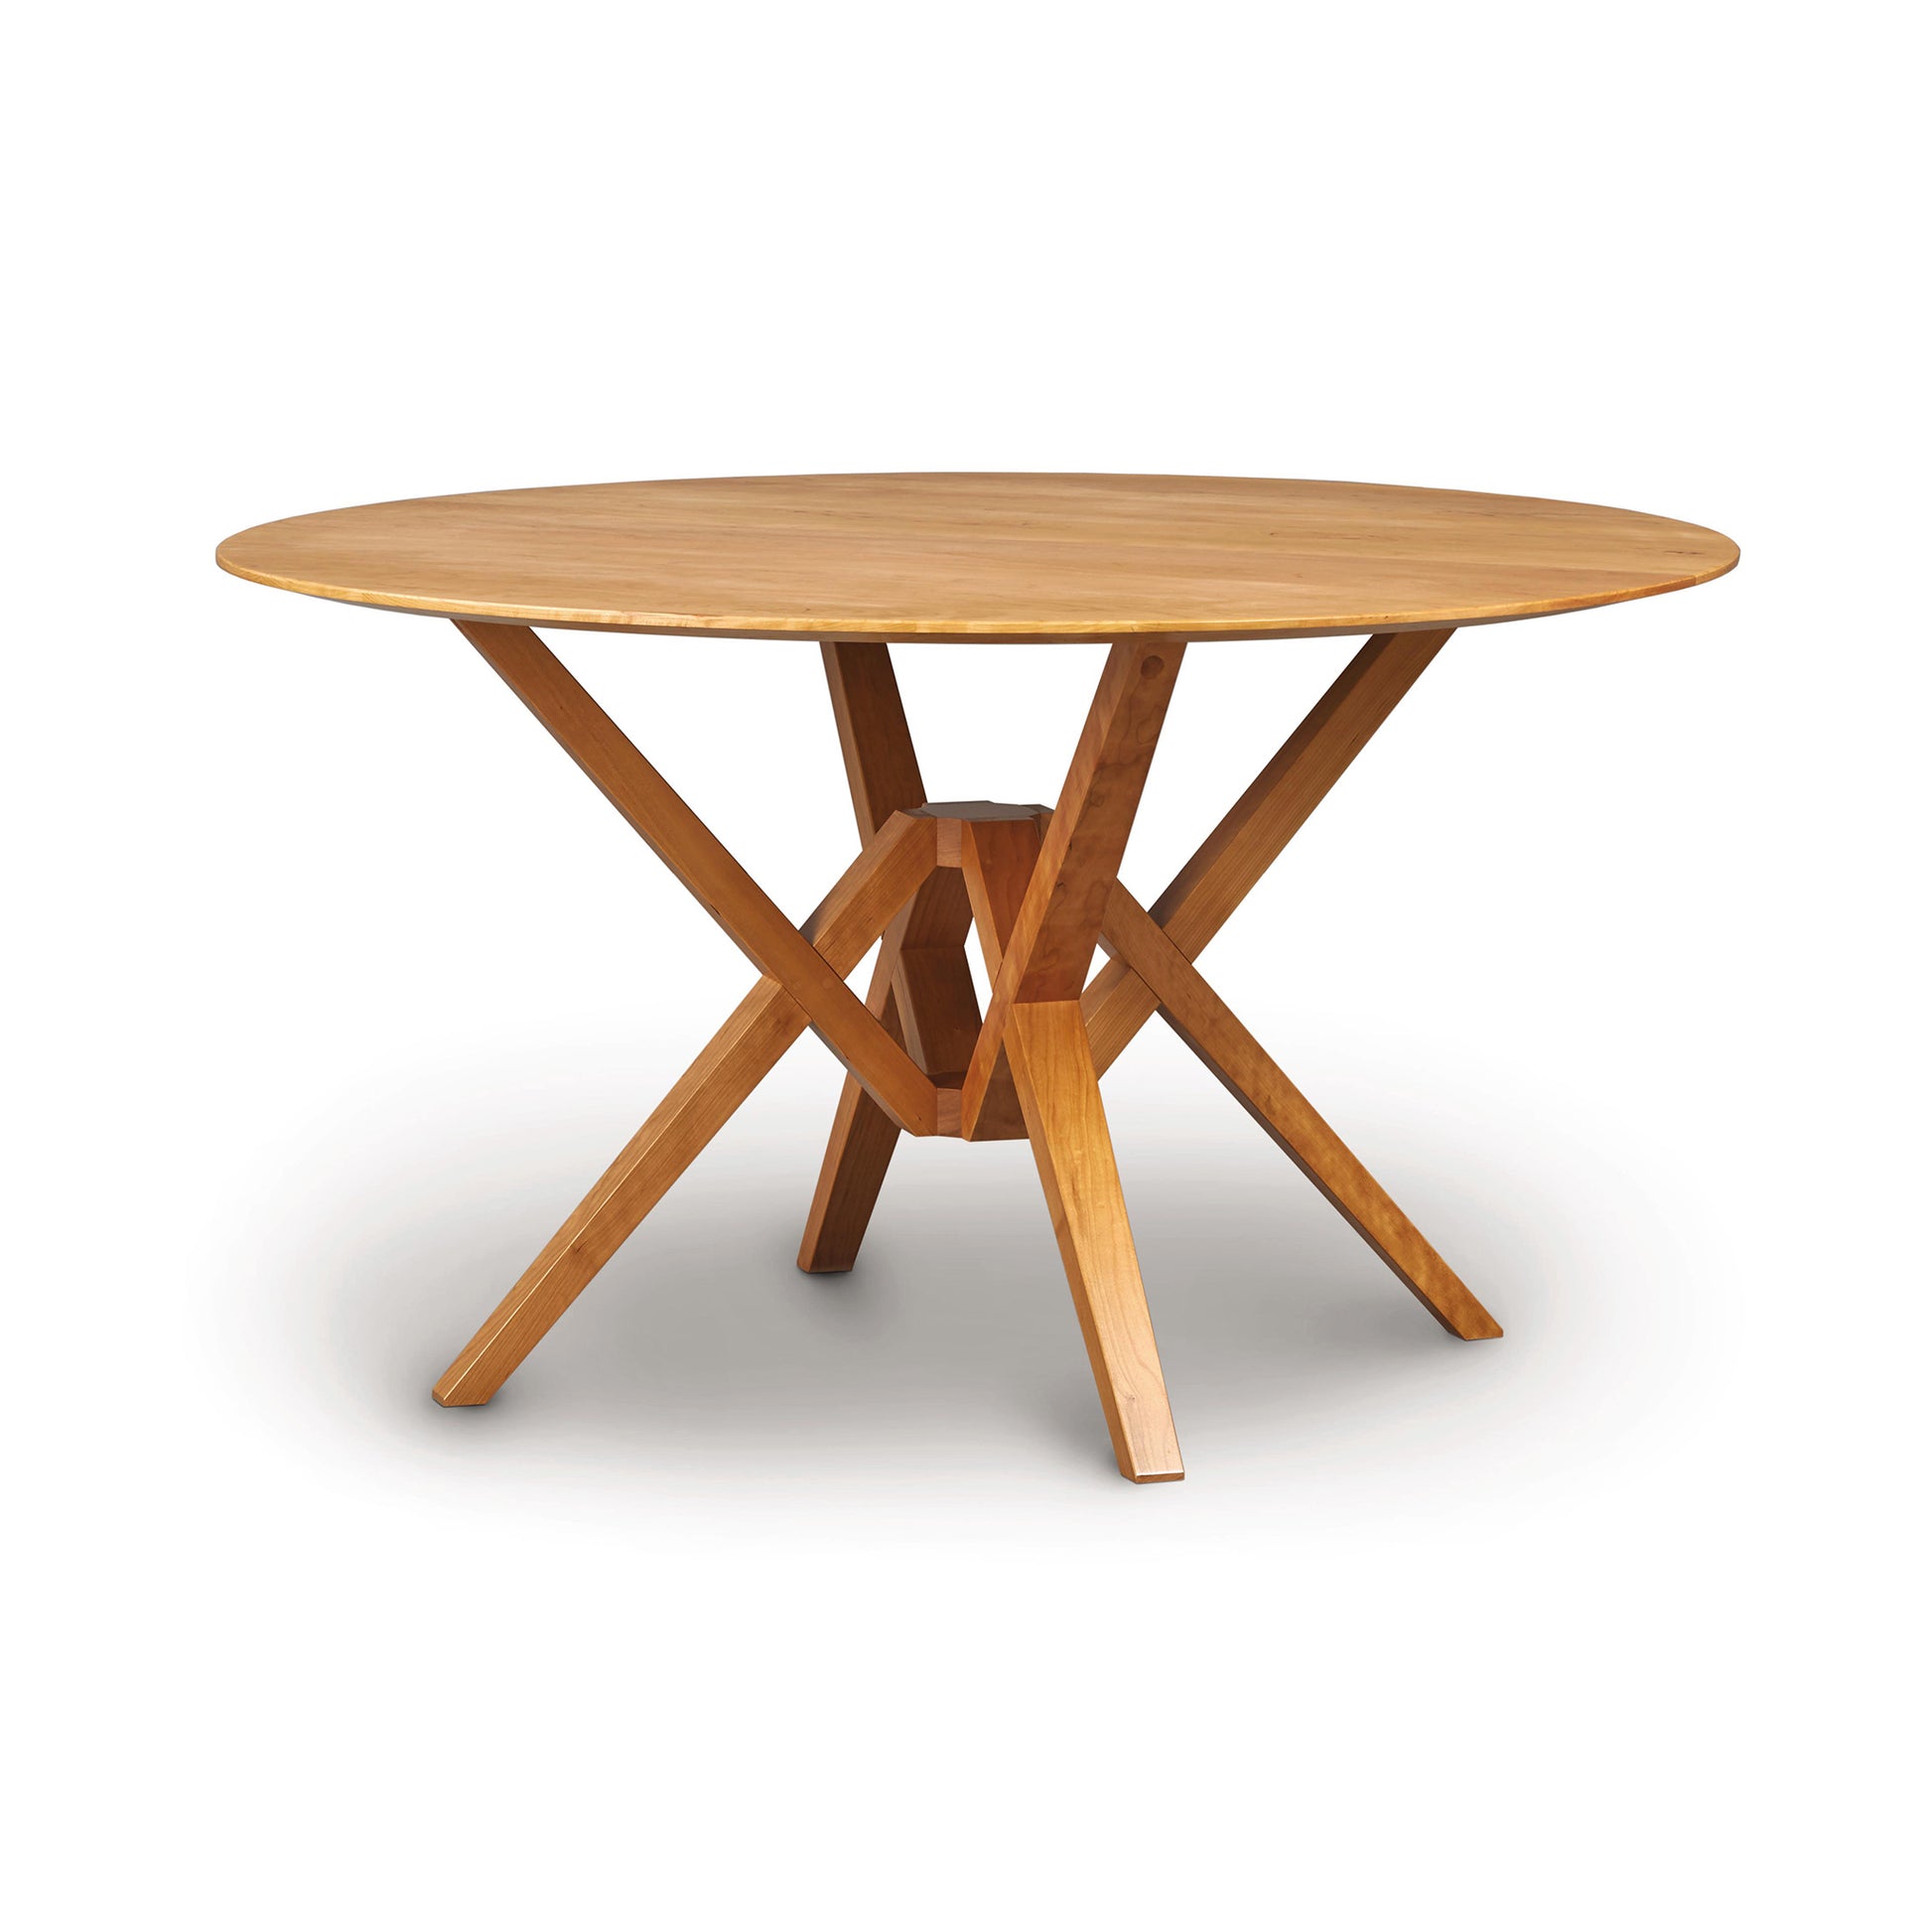 A round Copeland Furniture Exeter Round Solid Top Dining Table with an x-shaped base, isolated on a white background.